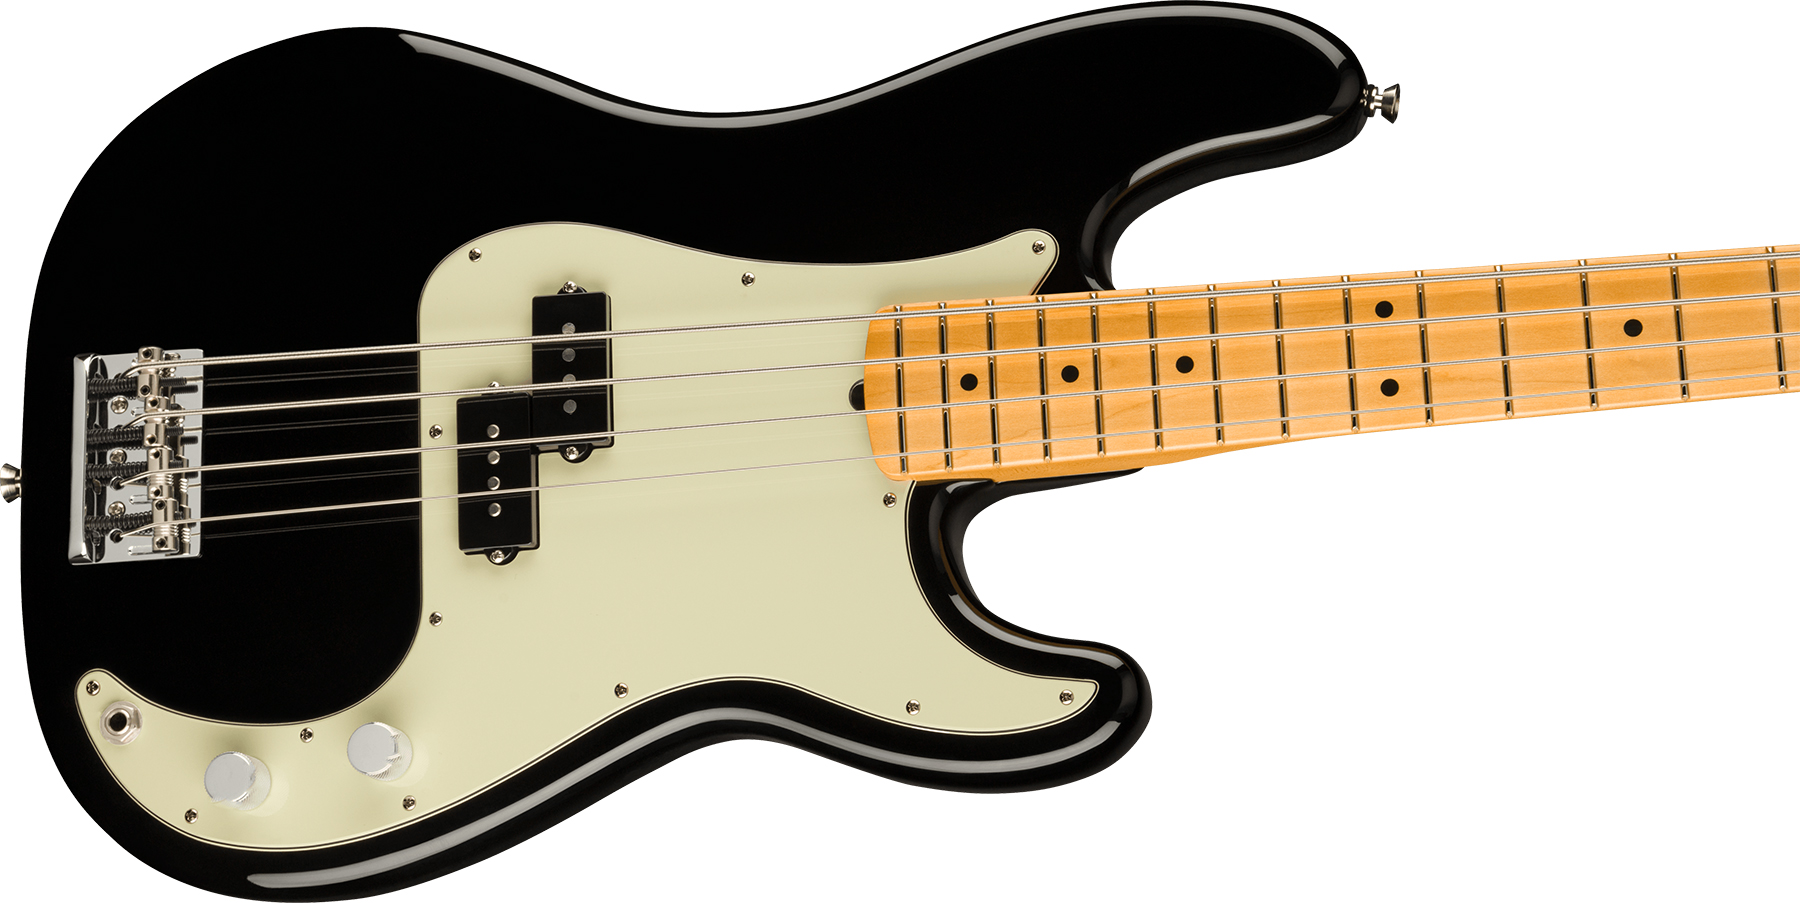 Fender Precision Bass American Professional Ii Usa Mn - Black - Solid body electric bass - Variation 2